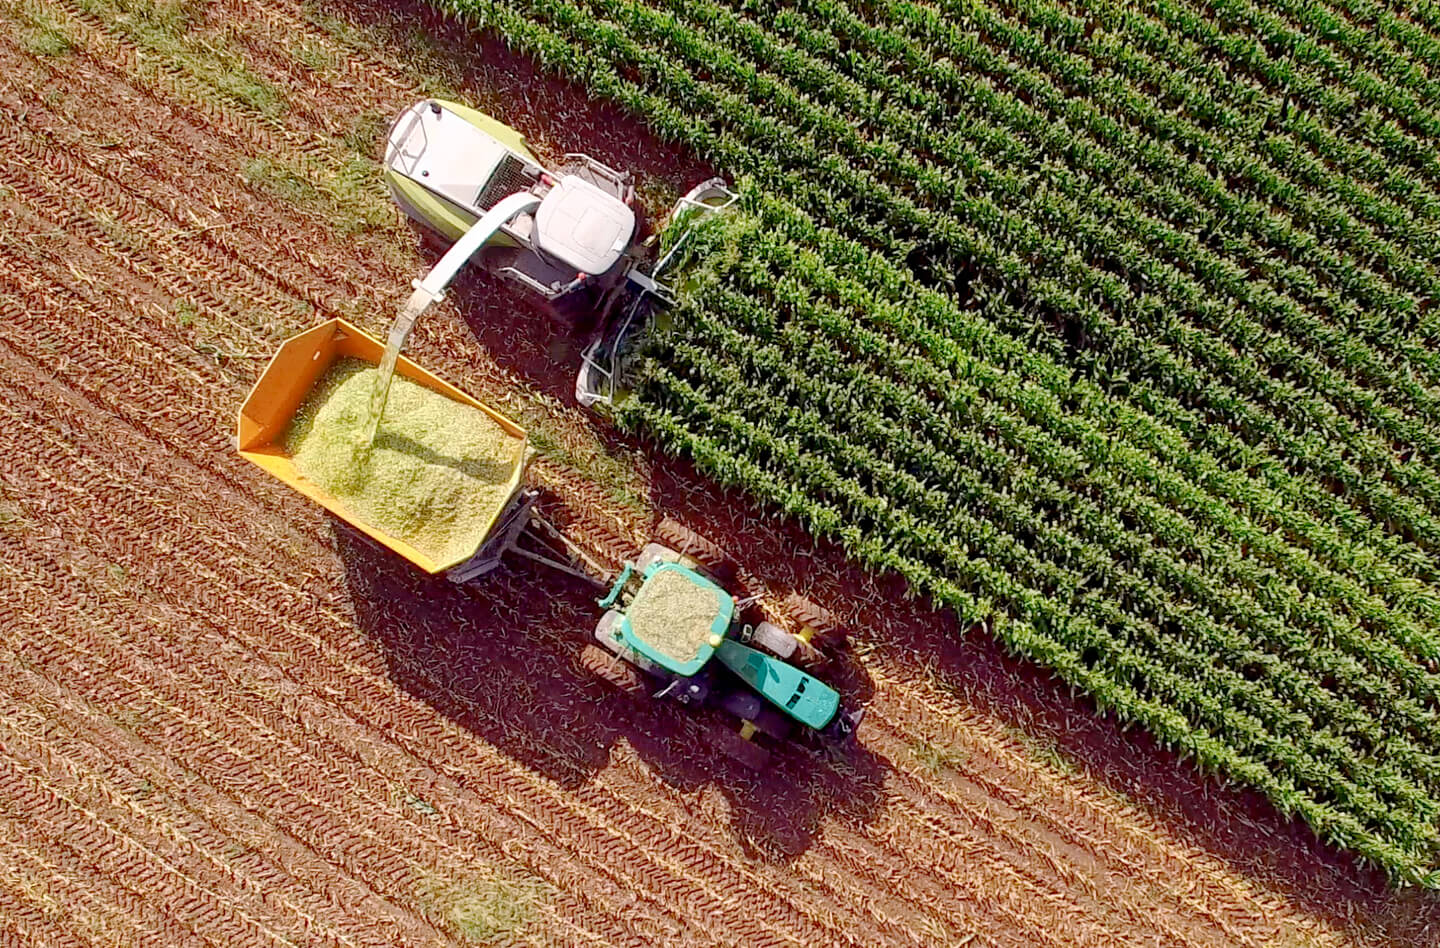 Brazilian agribusiness outlook: understand the sector in depth